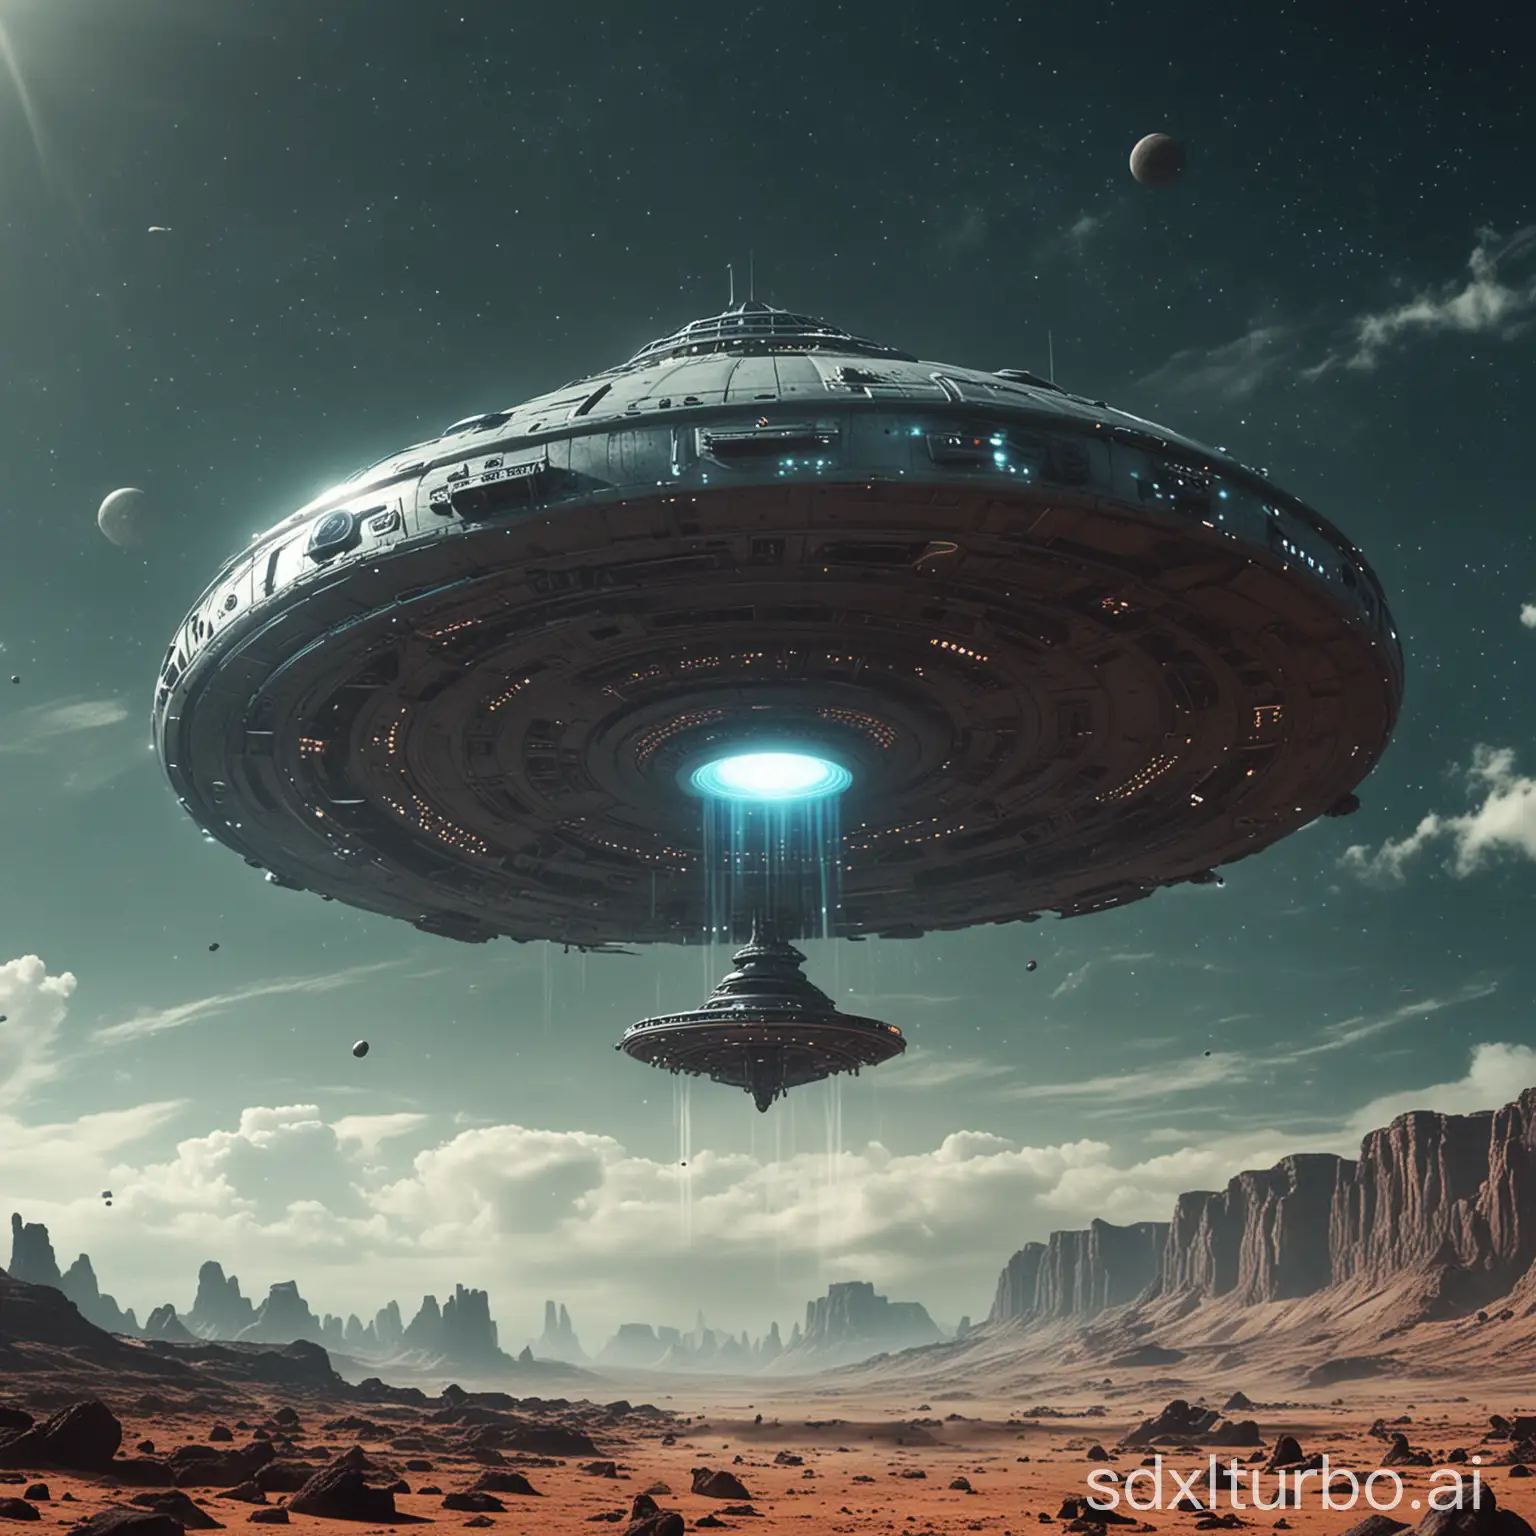 science fiction scene, a flying saucer